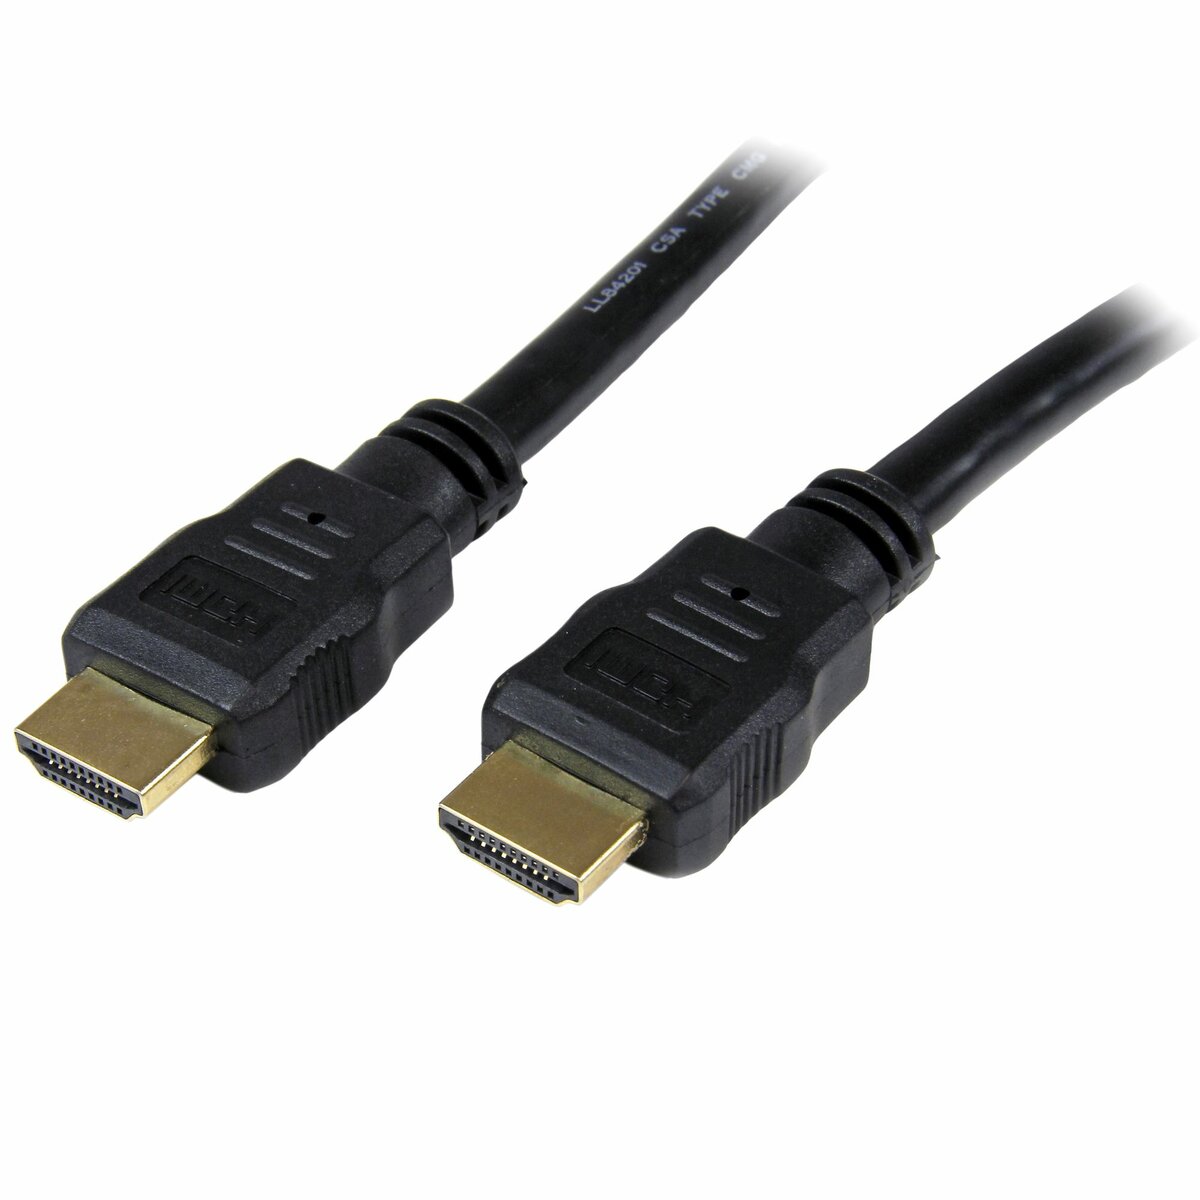  StarTech.com 3m (10ft) HDMI Cable - 4K High Speed HDMI Cable  with Ethernet - UHD 4K 30Hz Video - HDMI 1.4 Cable - Ultra HD HDMI  Monitors, Projectors, TVs & Displays 